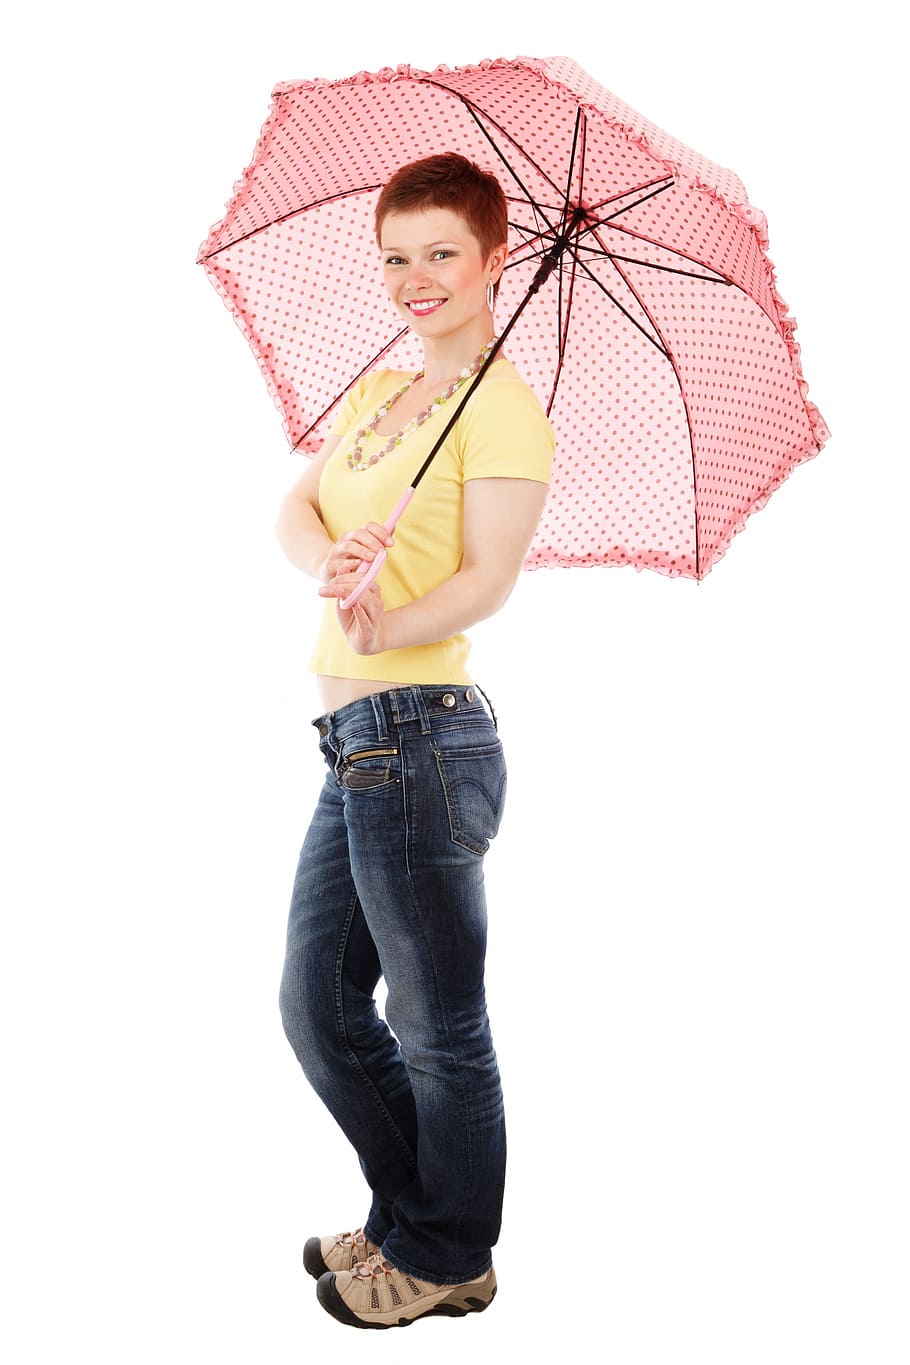 Posing With Umbrella Free Stock Photo - Public Domain Pictures